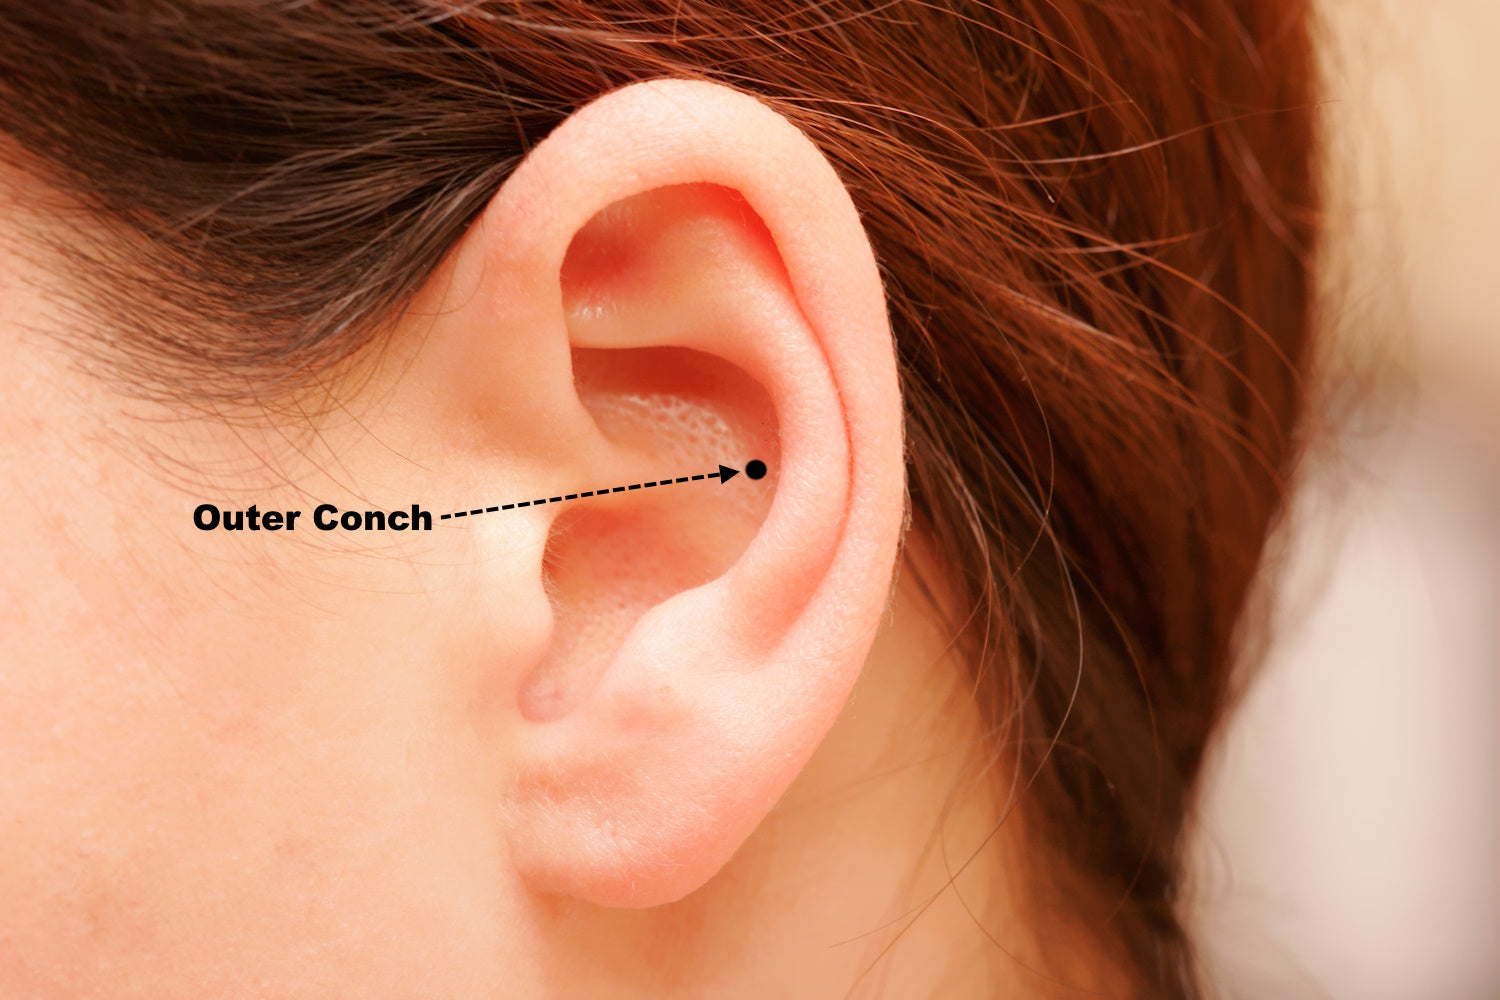 Shows the outer conch piercing location pictured on a closeup of an ear.